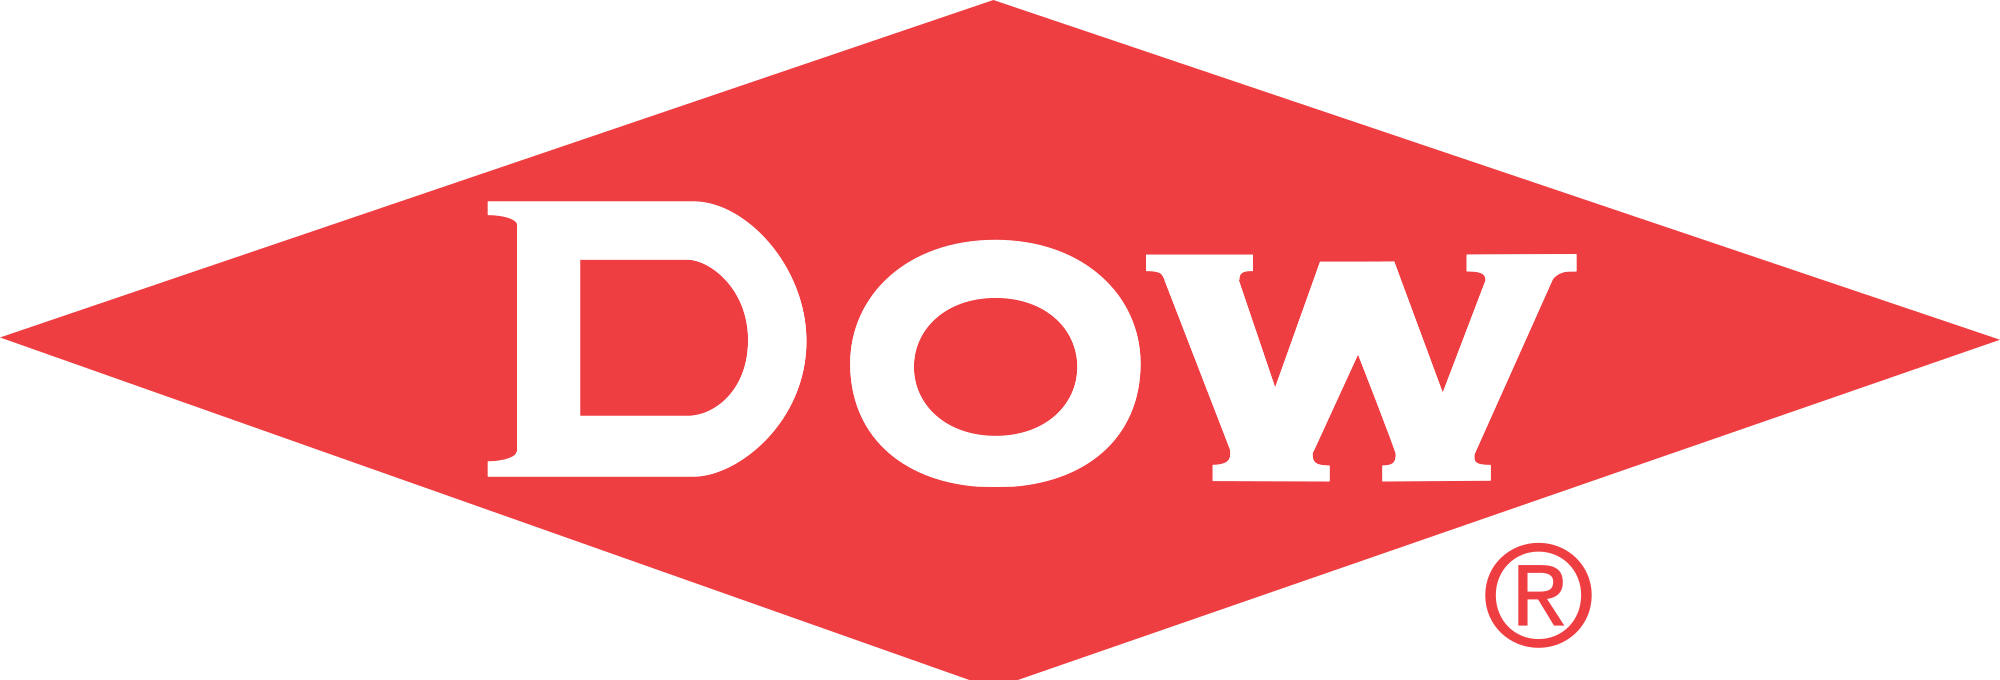 Chemical Logo - File:Dow Chemical Company logo.svg - Wikimedia Commons